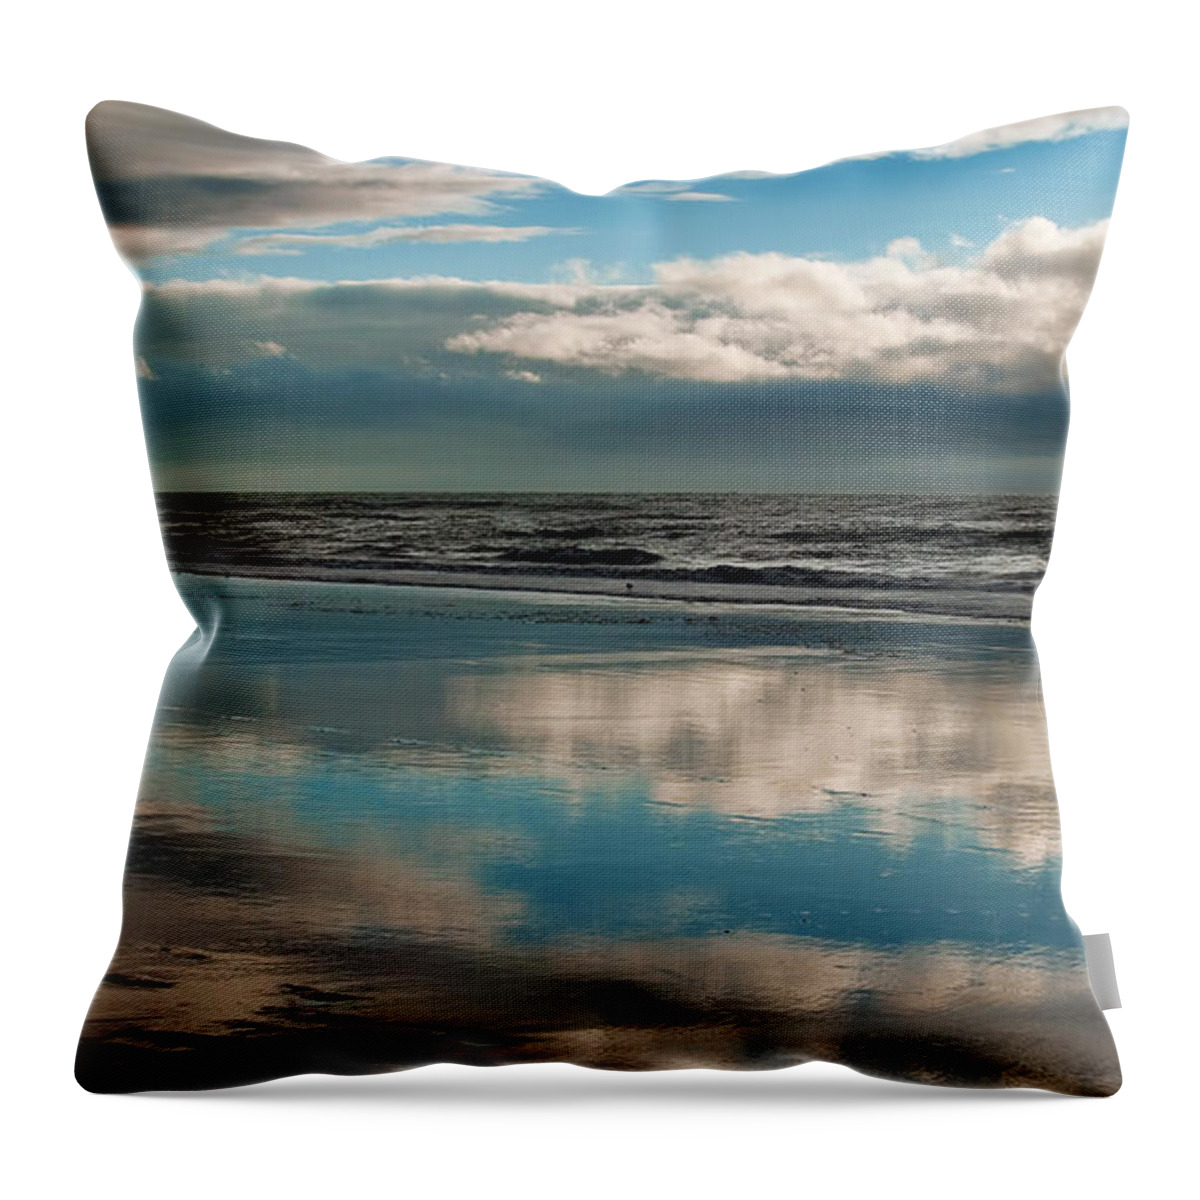 Sand Dunes Oxnard California Water Reflections Waves Ocean Beach Sunset Clouds Throw Pillow featuring the photograph Reflections by Wendell Ward